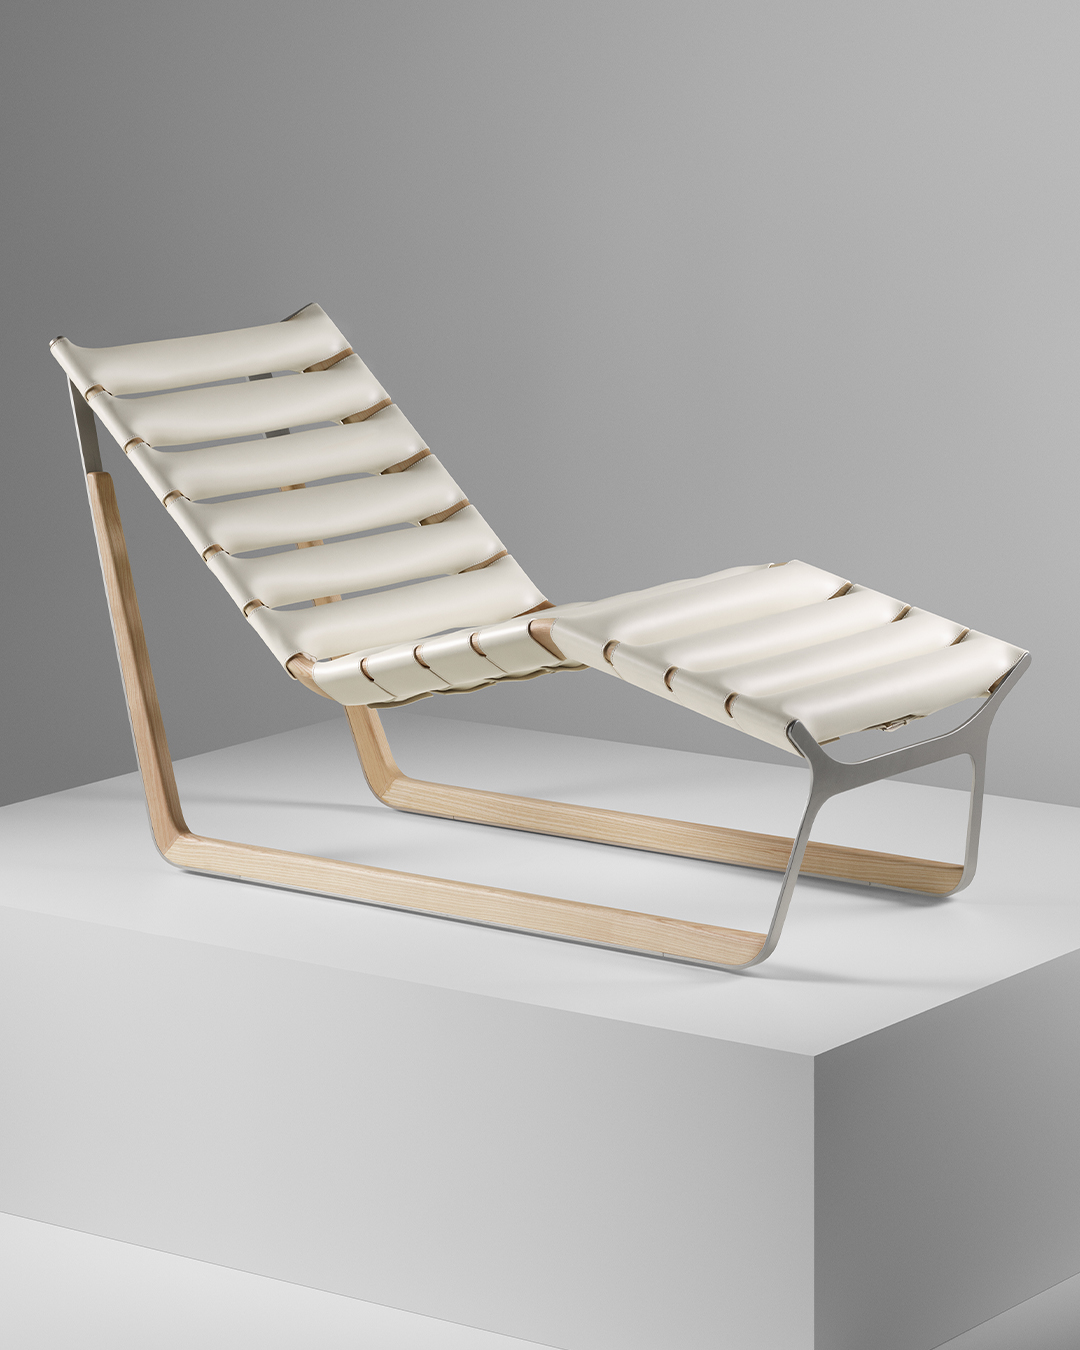 Louis Vuitton on X: The Belt Lounge Chair by #AtelierOi. The